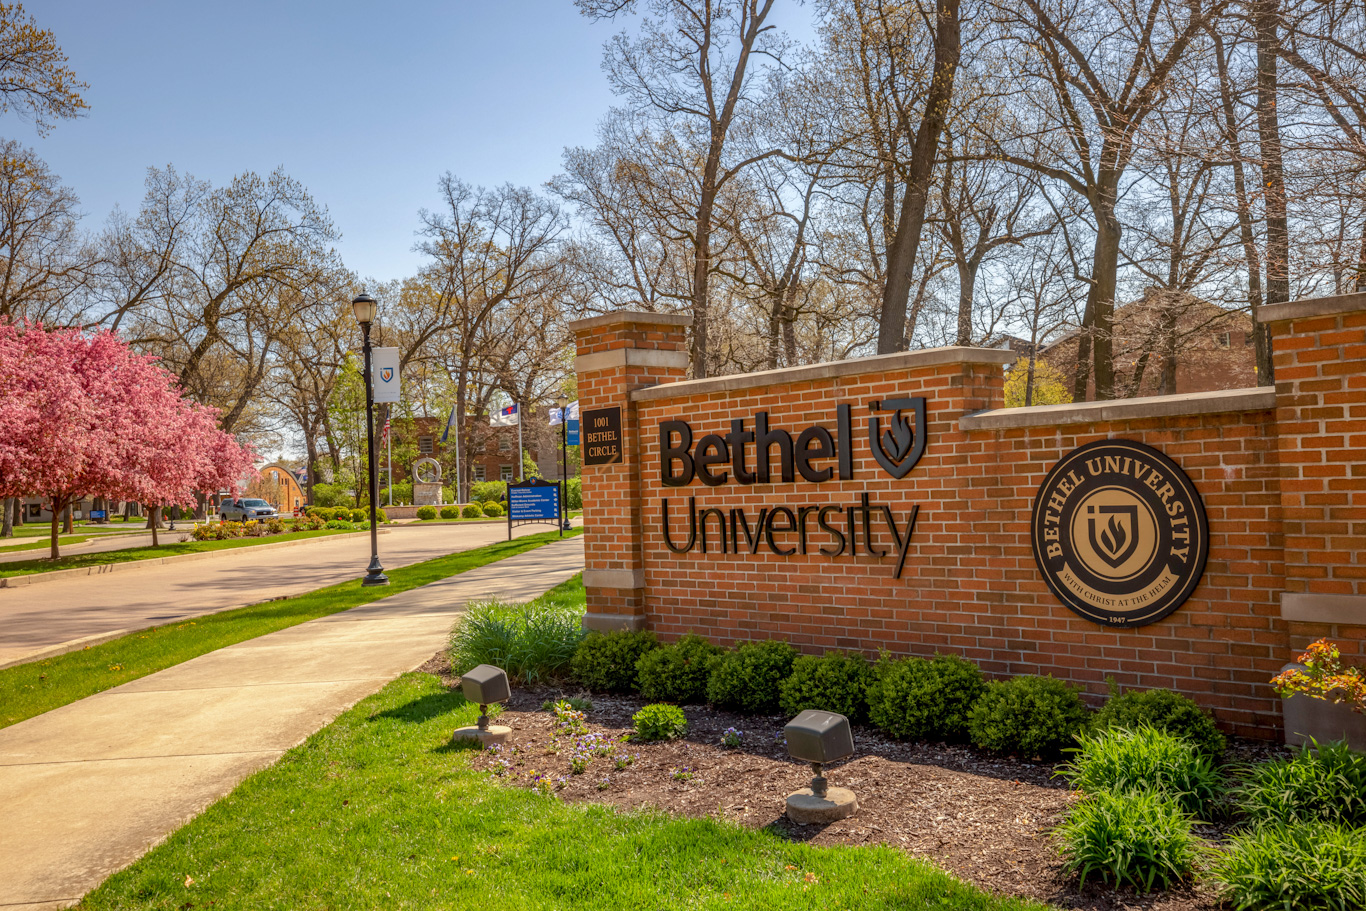 “I love Bethel in every sense and every way." 